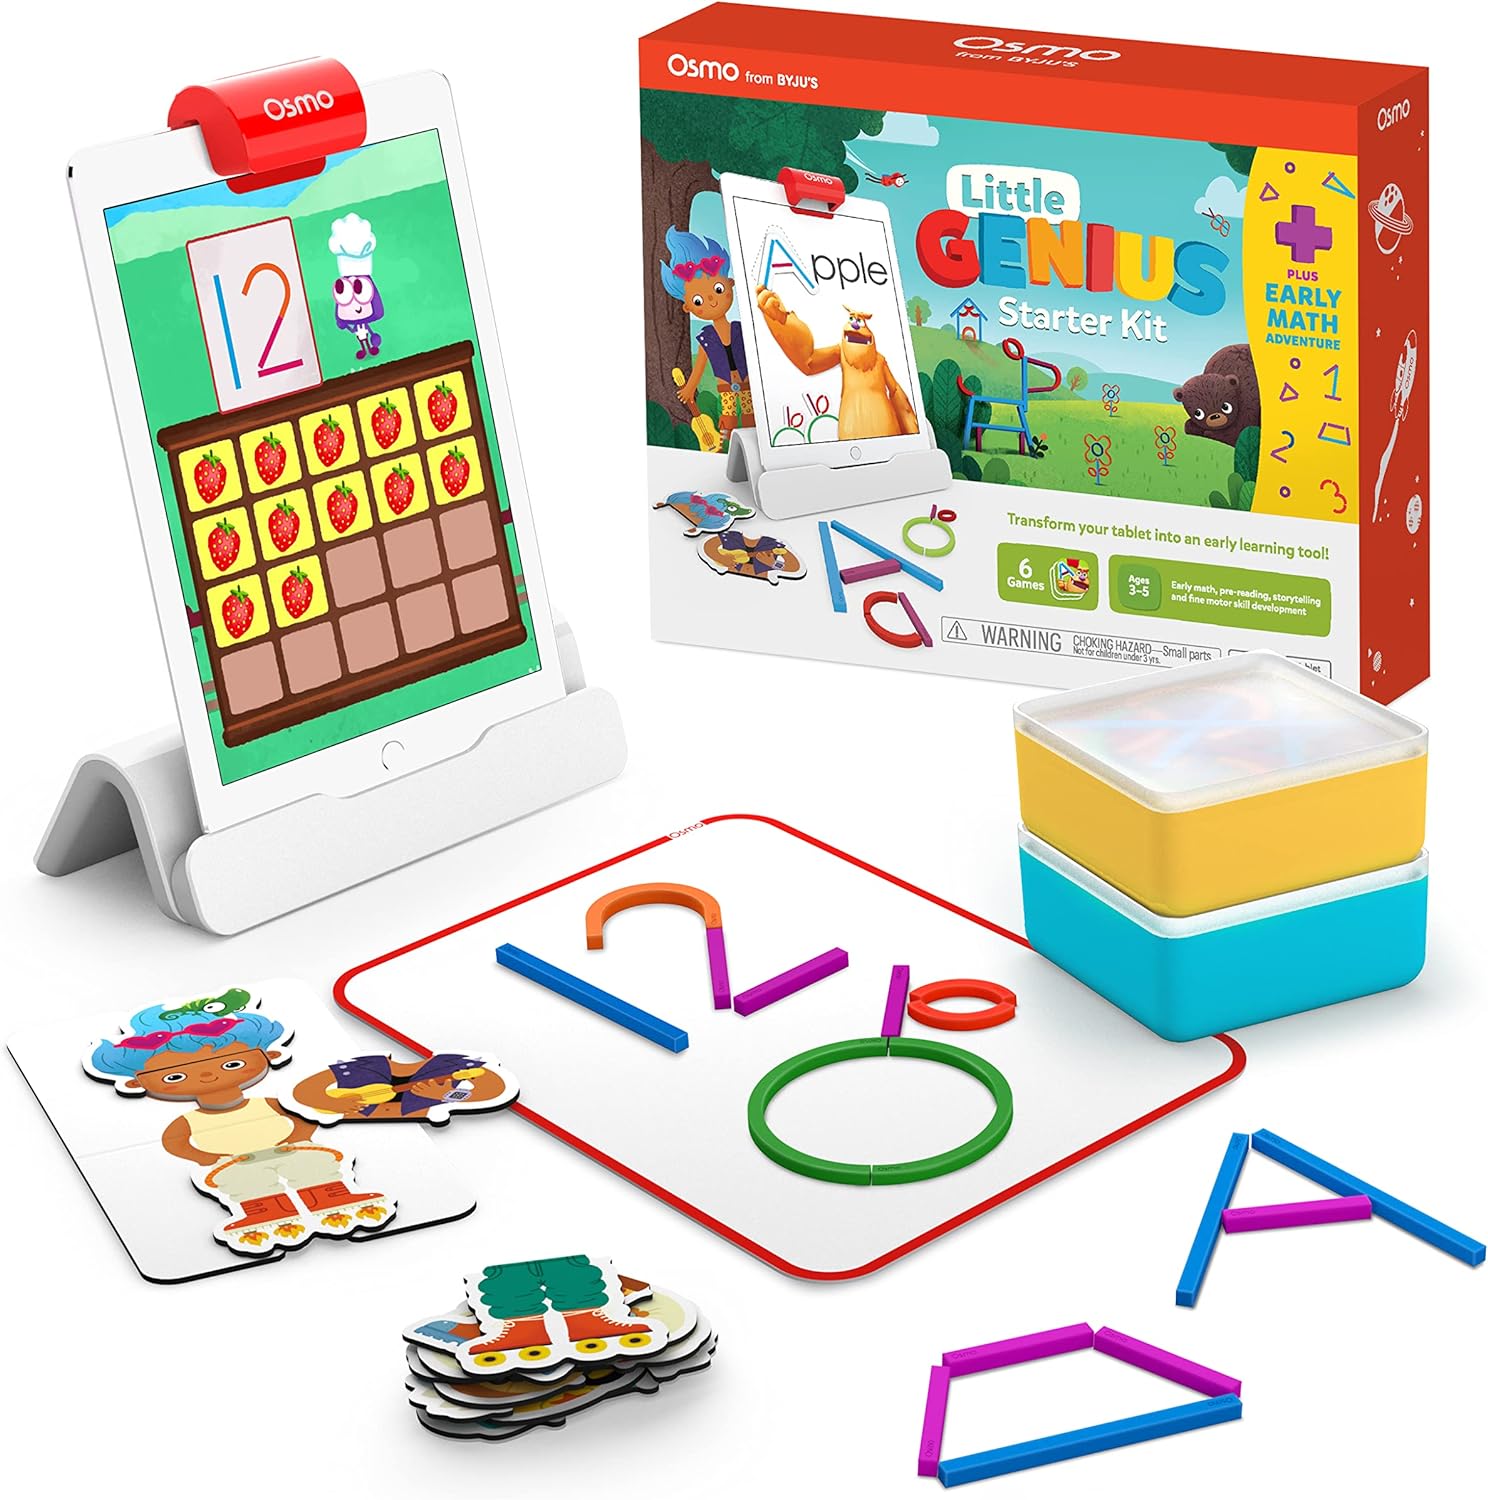 Osmo-Little Genius Starter Kit for iPad + Early Math Adventure-6 Educational Learning Games Ages 3-5-Counting, Shapes,Phonics Creativity-STEM Toy Gifts-Kids(Osmo iPad Base Included-Amazon Exclusive) : Toys Games